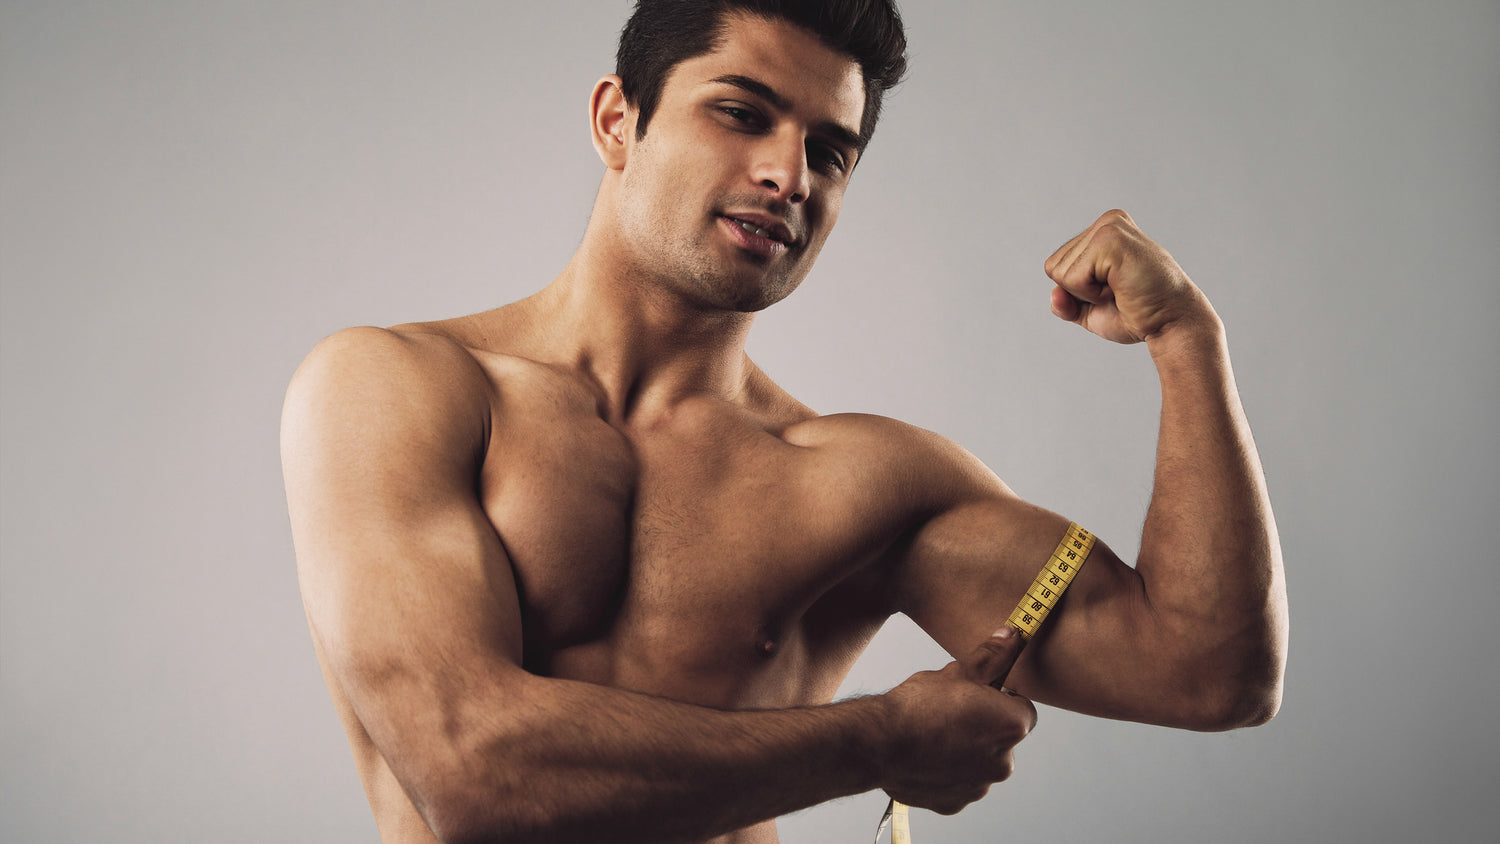 Fit hispanic male model measuring his body. Masculine young male measuring biceps with tape measure on grey background.